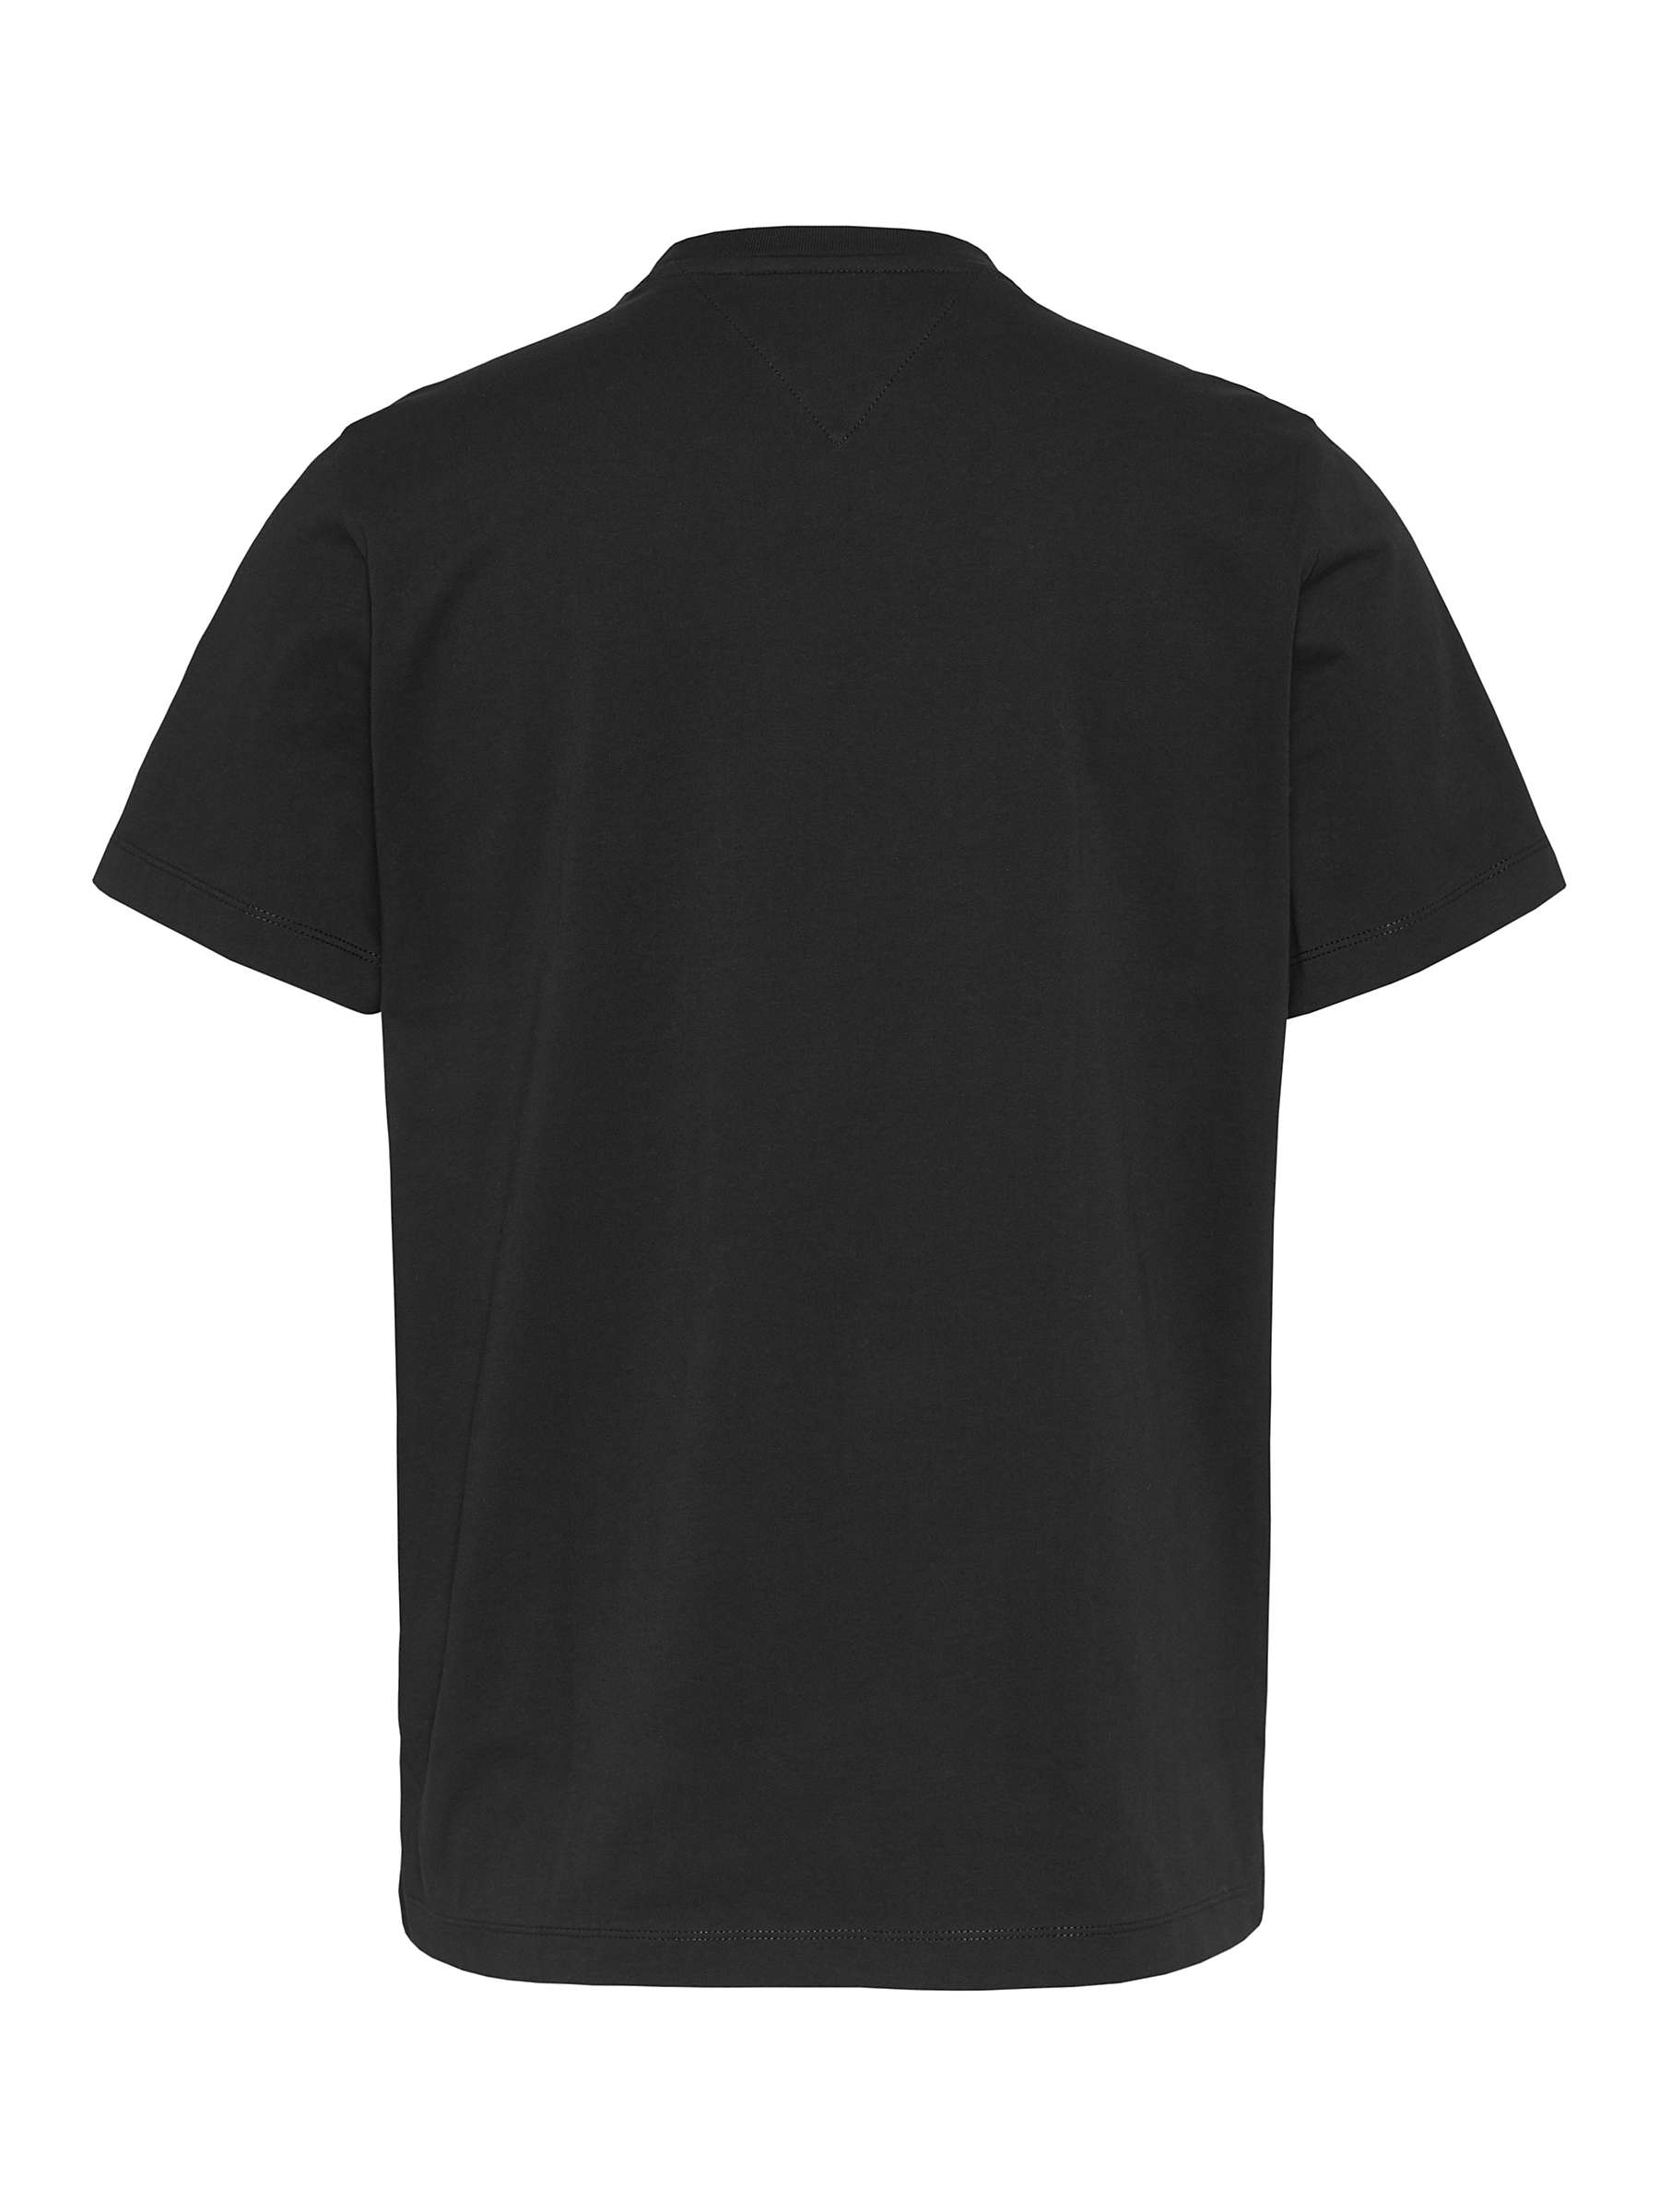 Buy Tommy Jeans Jersey Crew Neck Tee Online at johnlewis.com